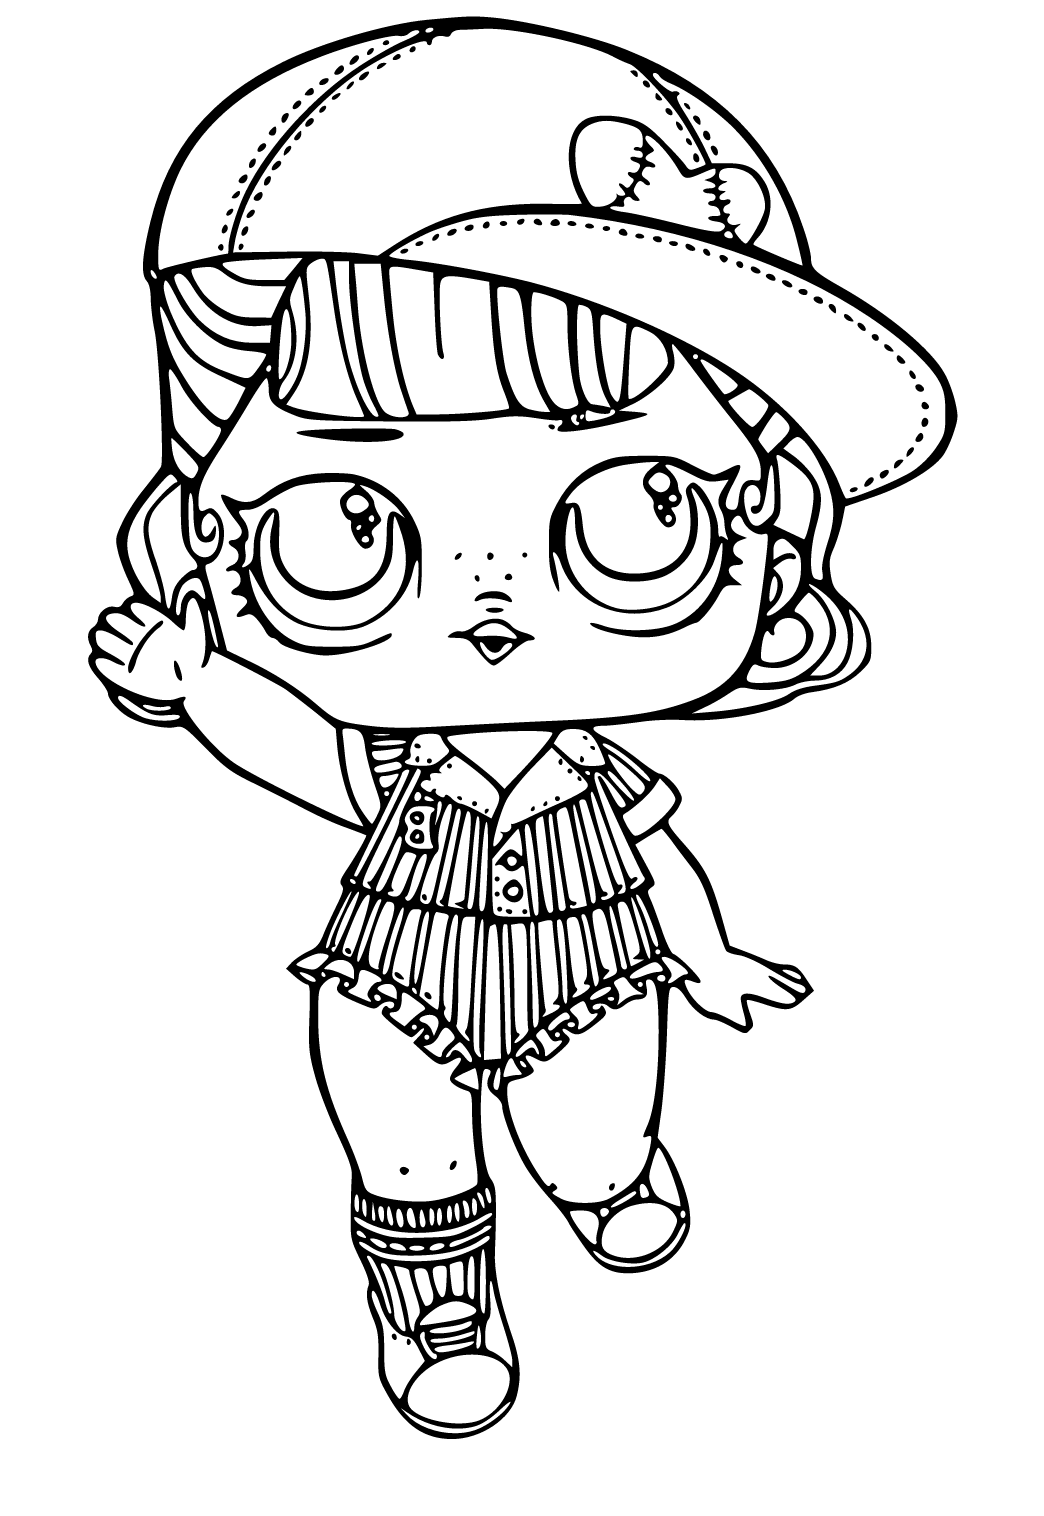 Free printable lol tennis coloring page sheet and picture for adults and kids girls and boys